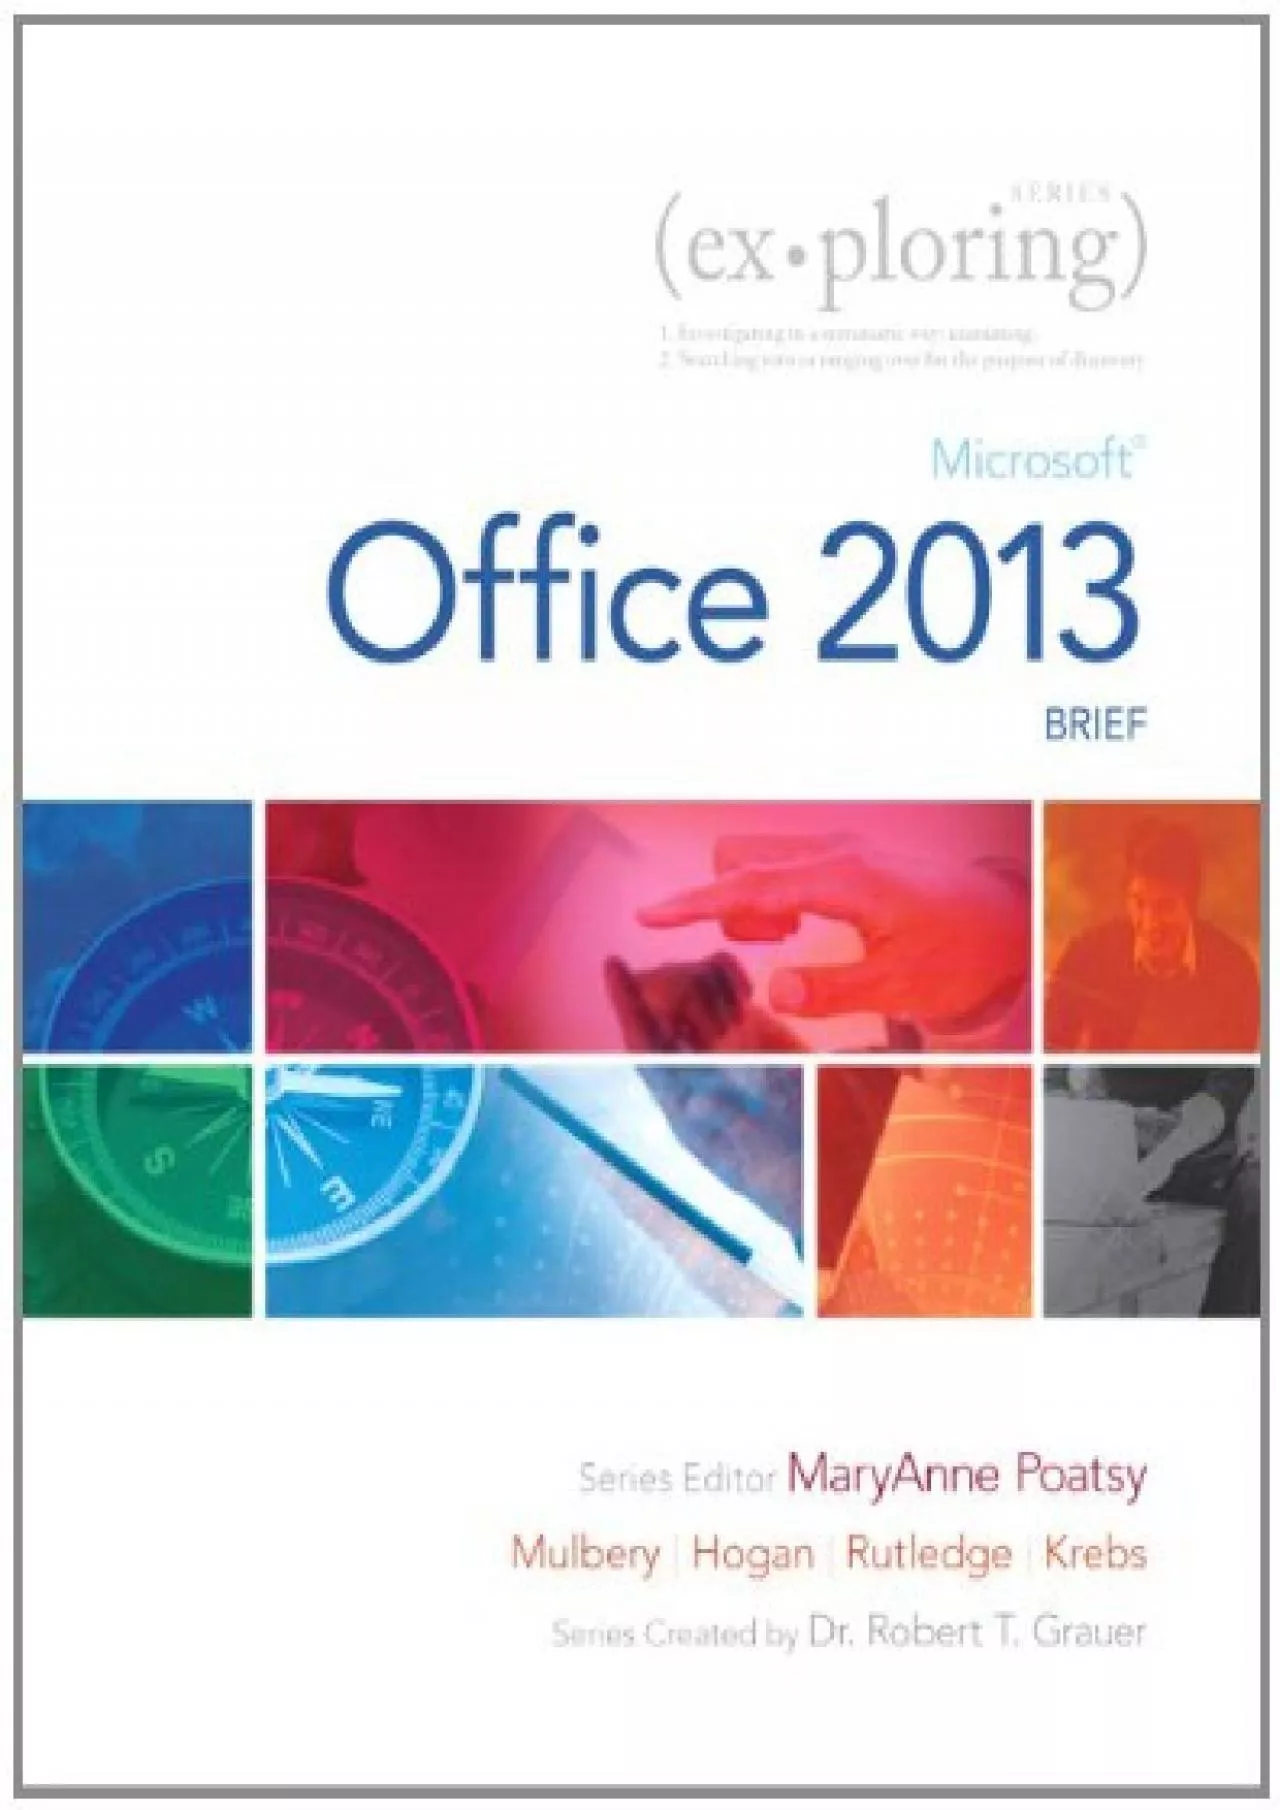 (BOOK)-Exploring: Microsoft Office 2013, Brief (Exploring for Office 2013)